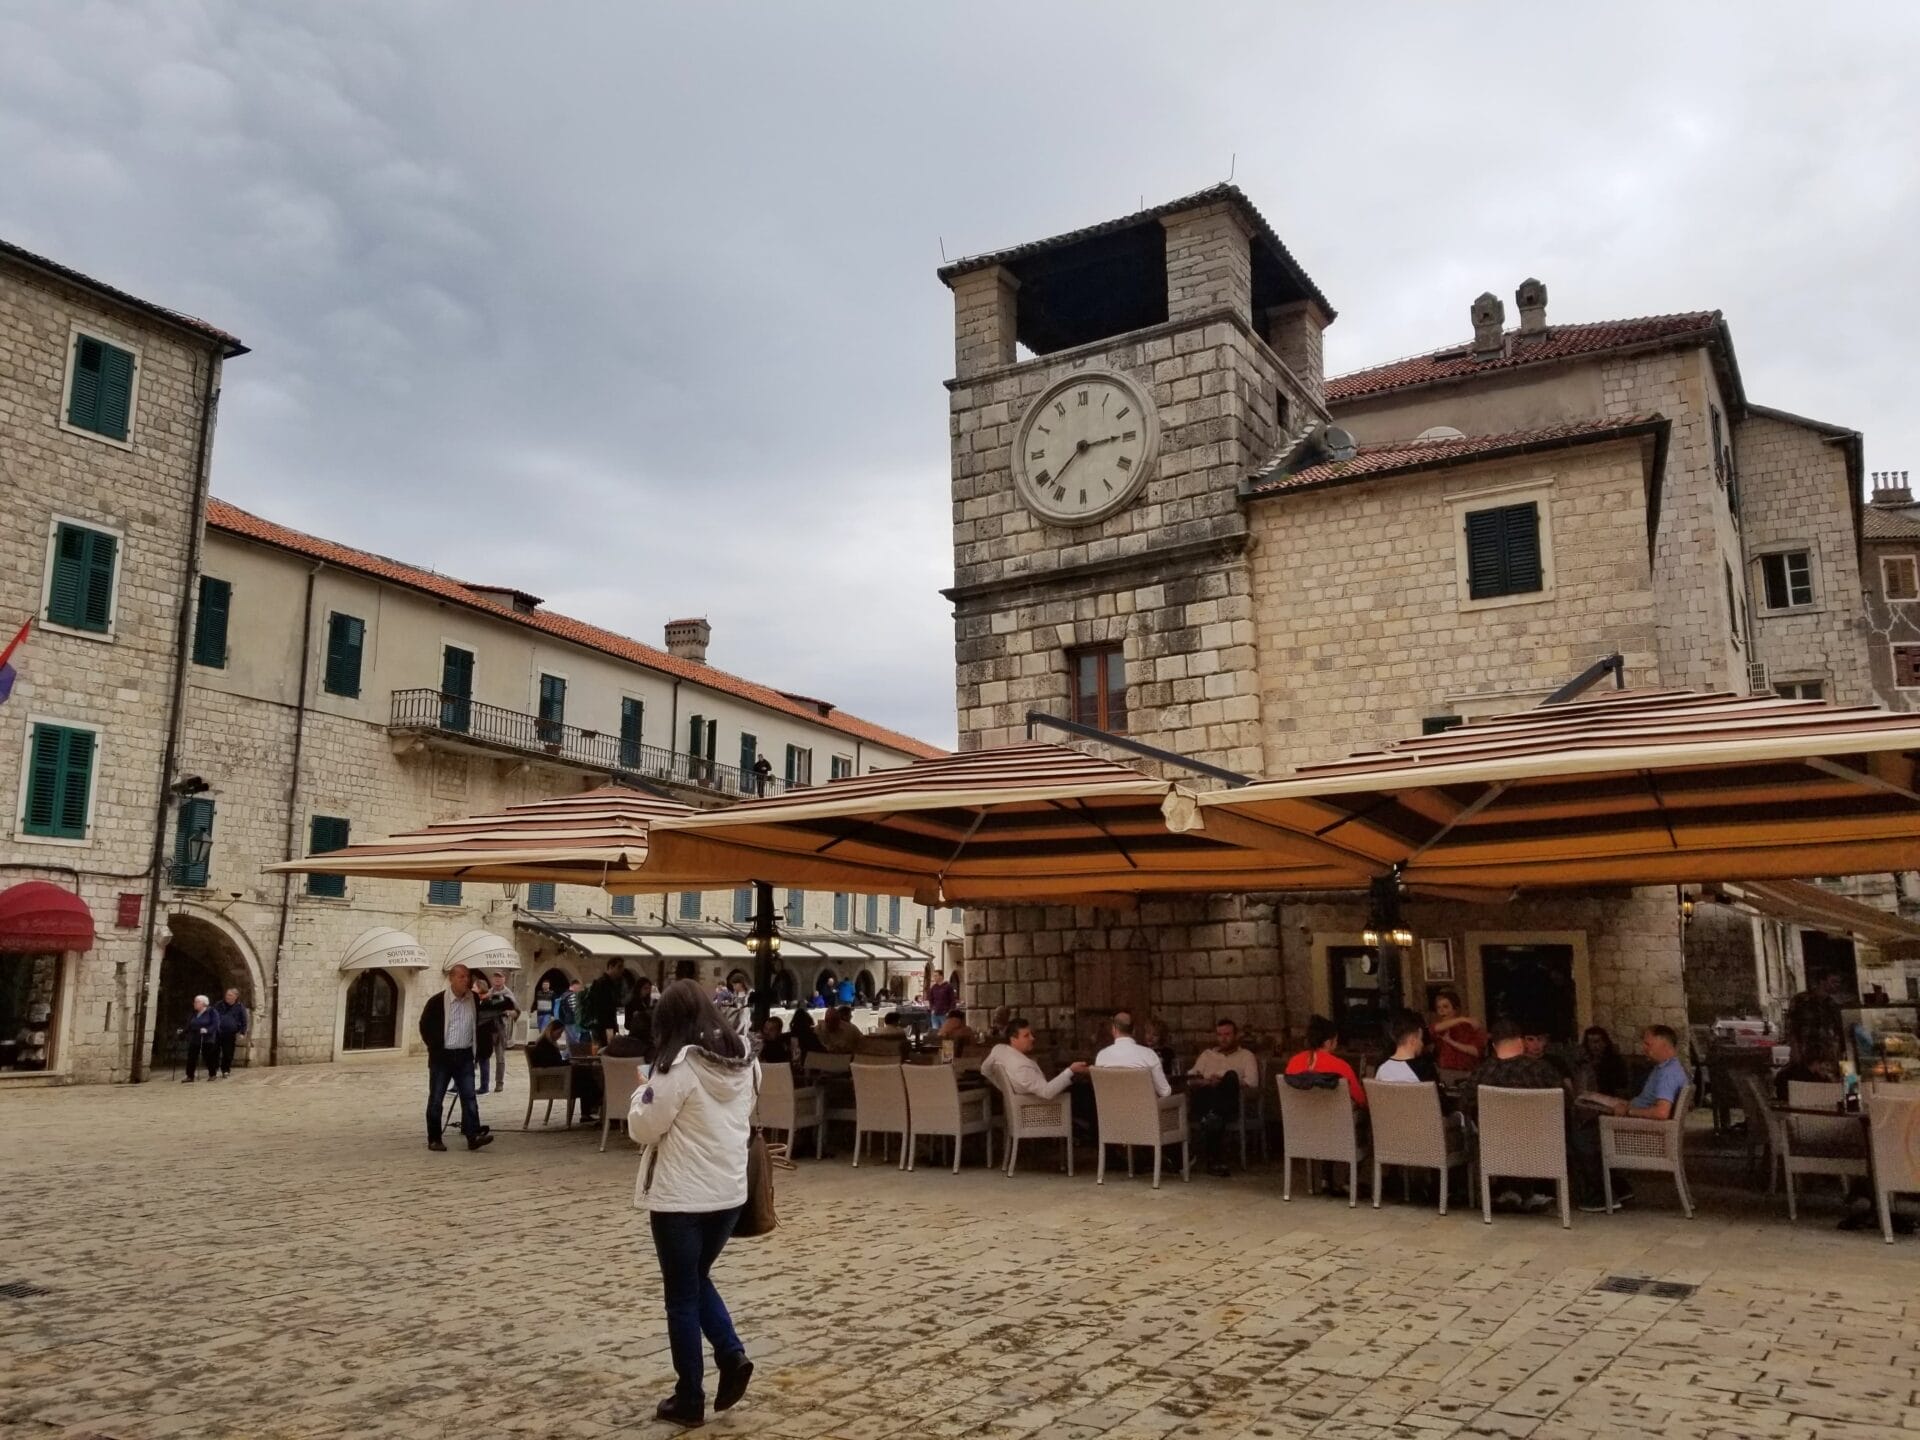 Kotor Montenegró things to do - Restaurants in the square